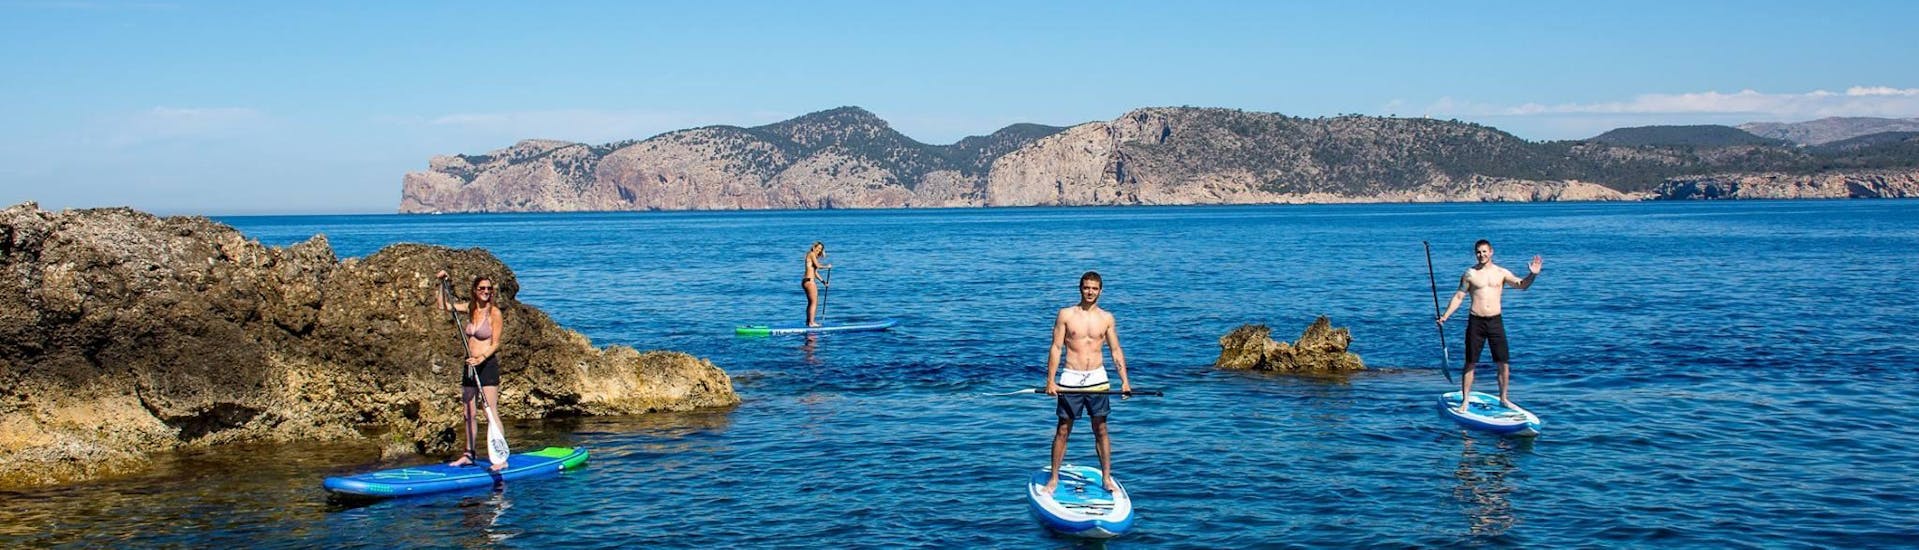 Group of participants stand-up paddling with rentals offered by ZOEA Mallorca.